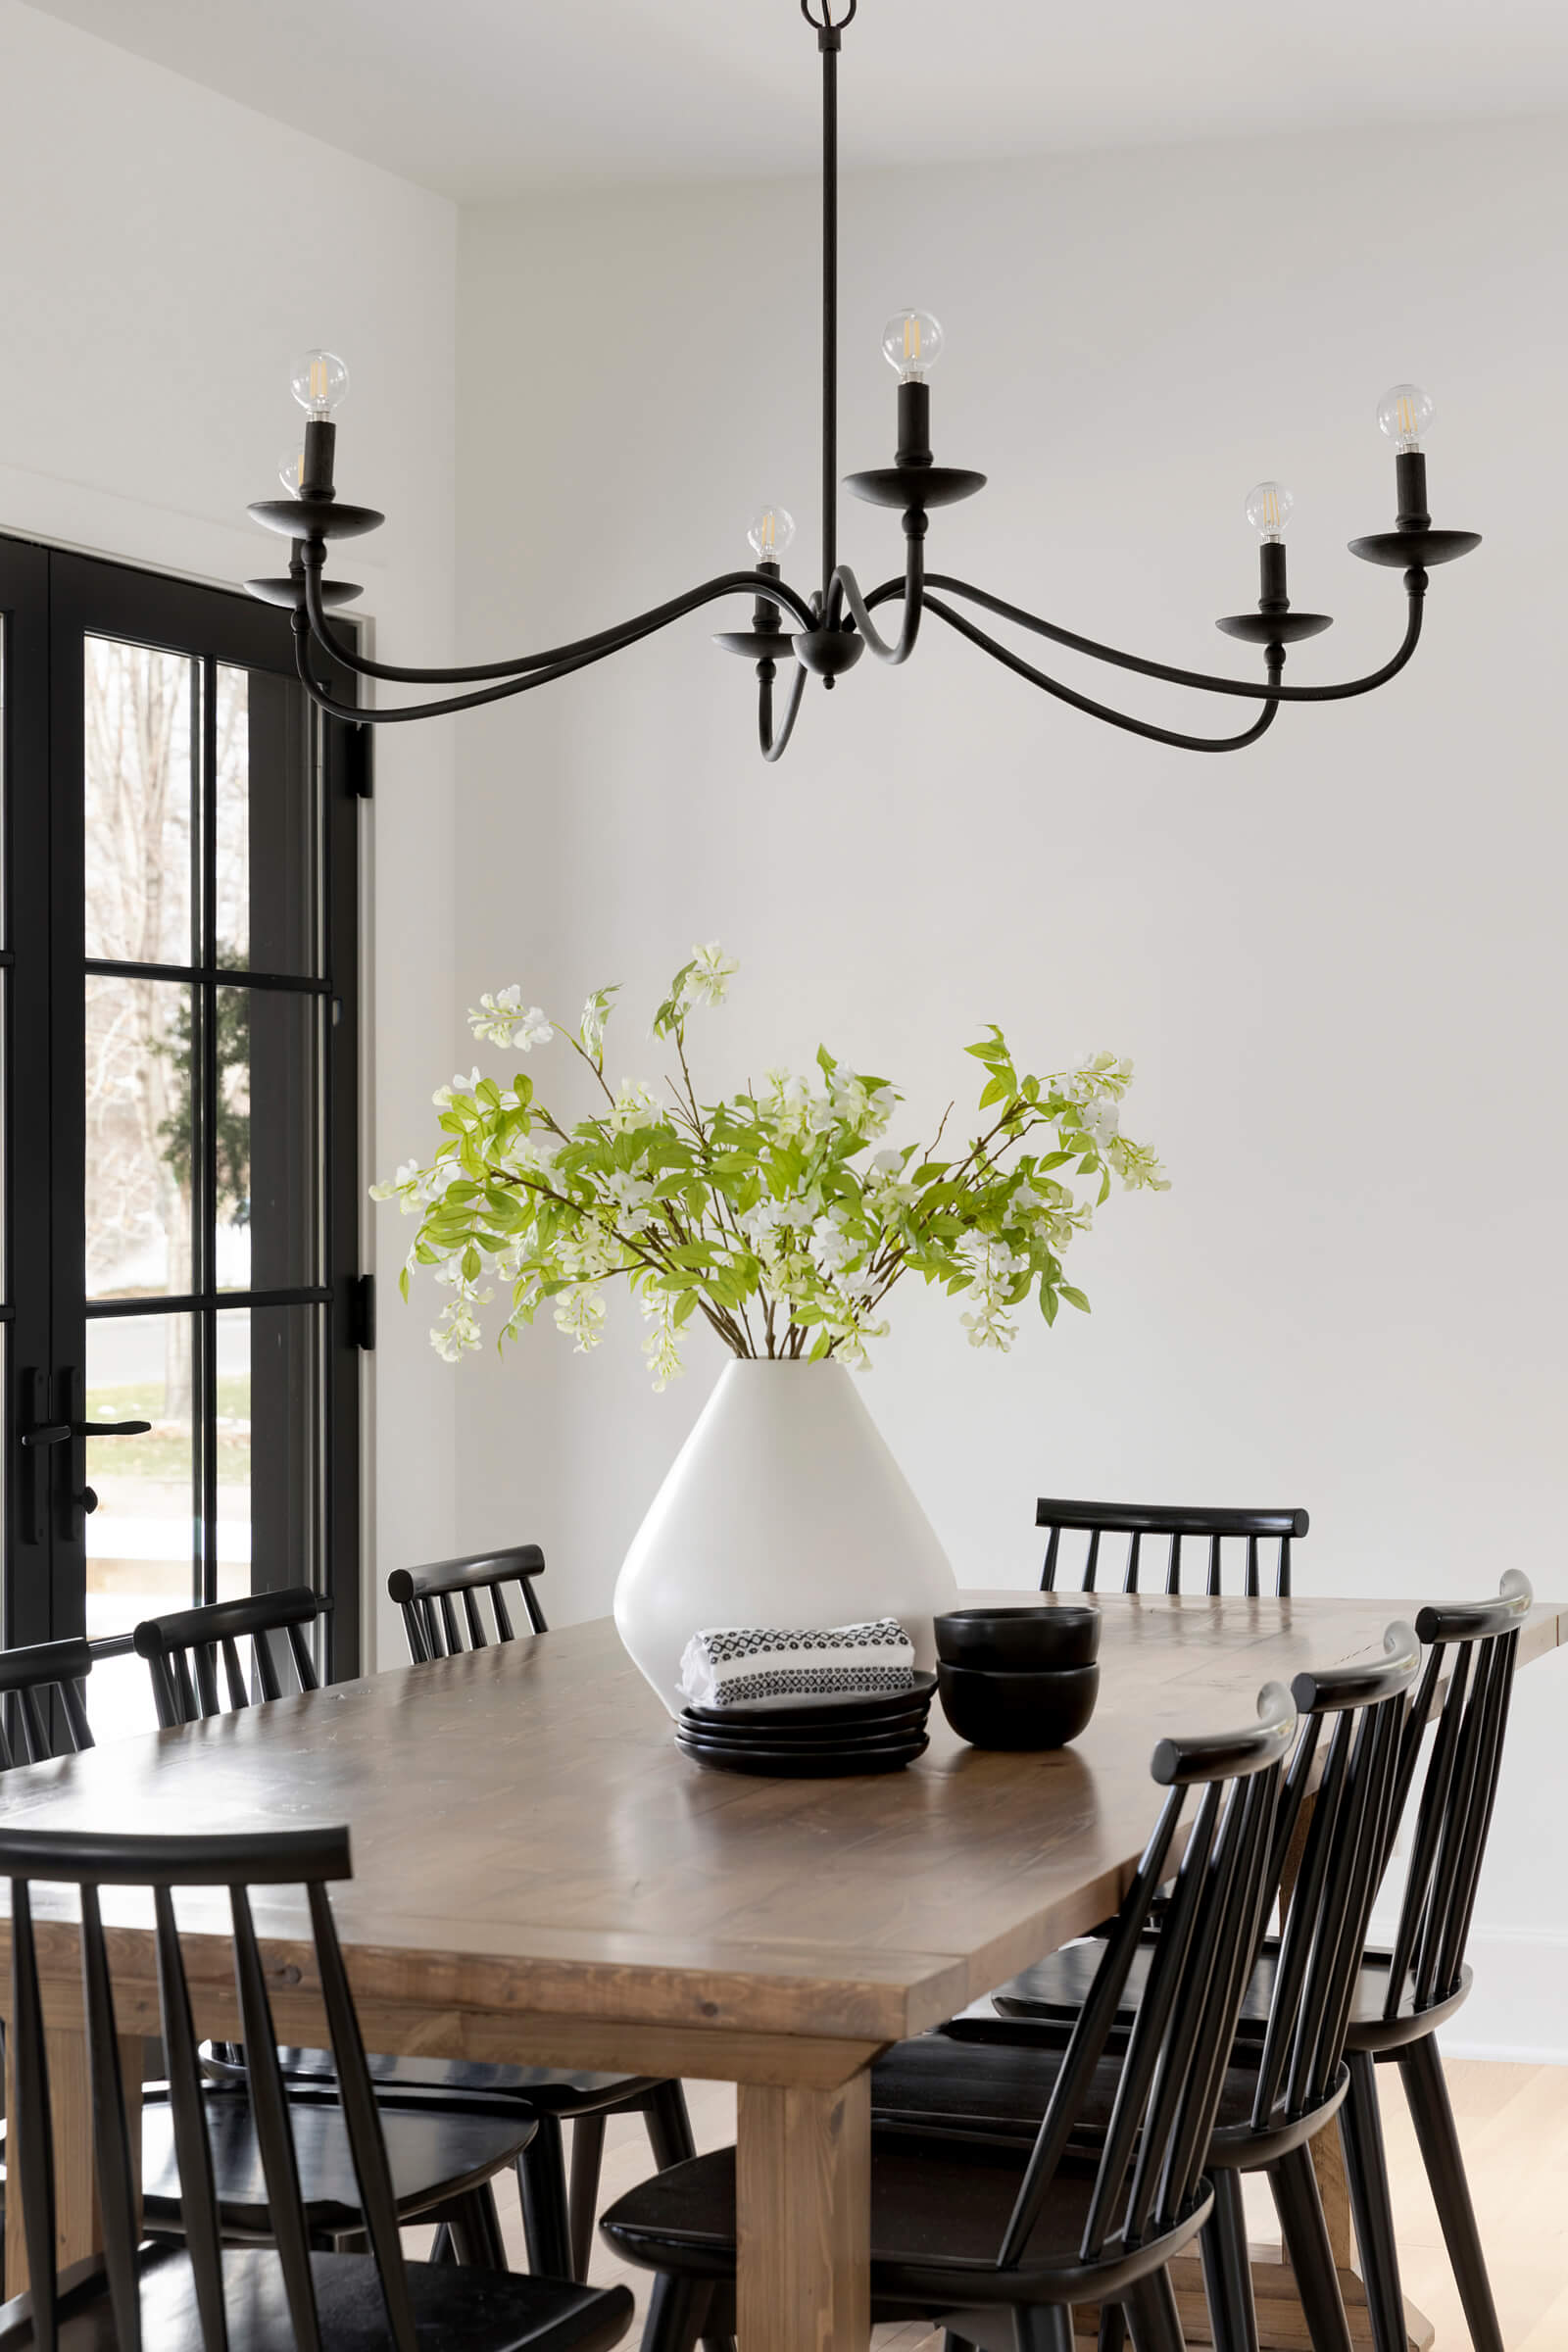 Iron Chandelier for Better Illumination  and Regal Decor